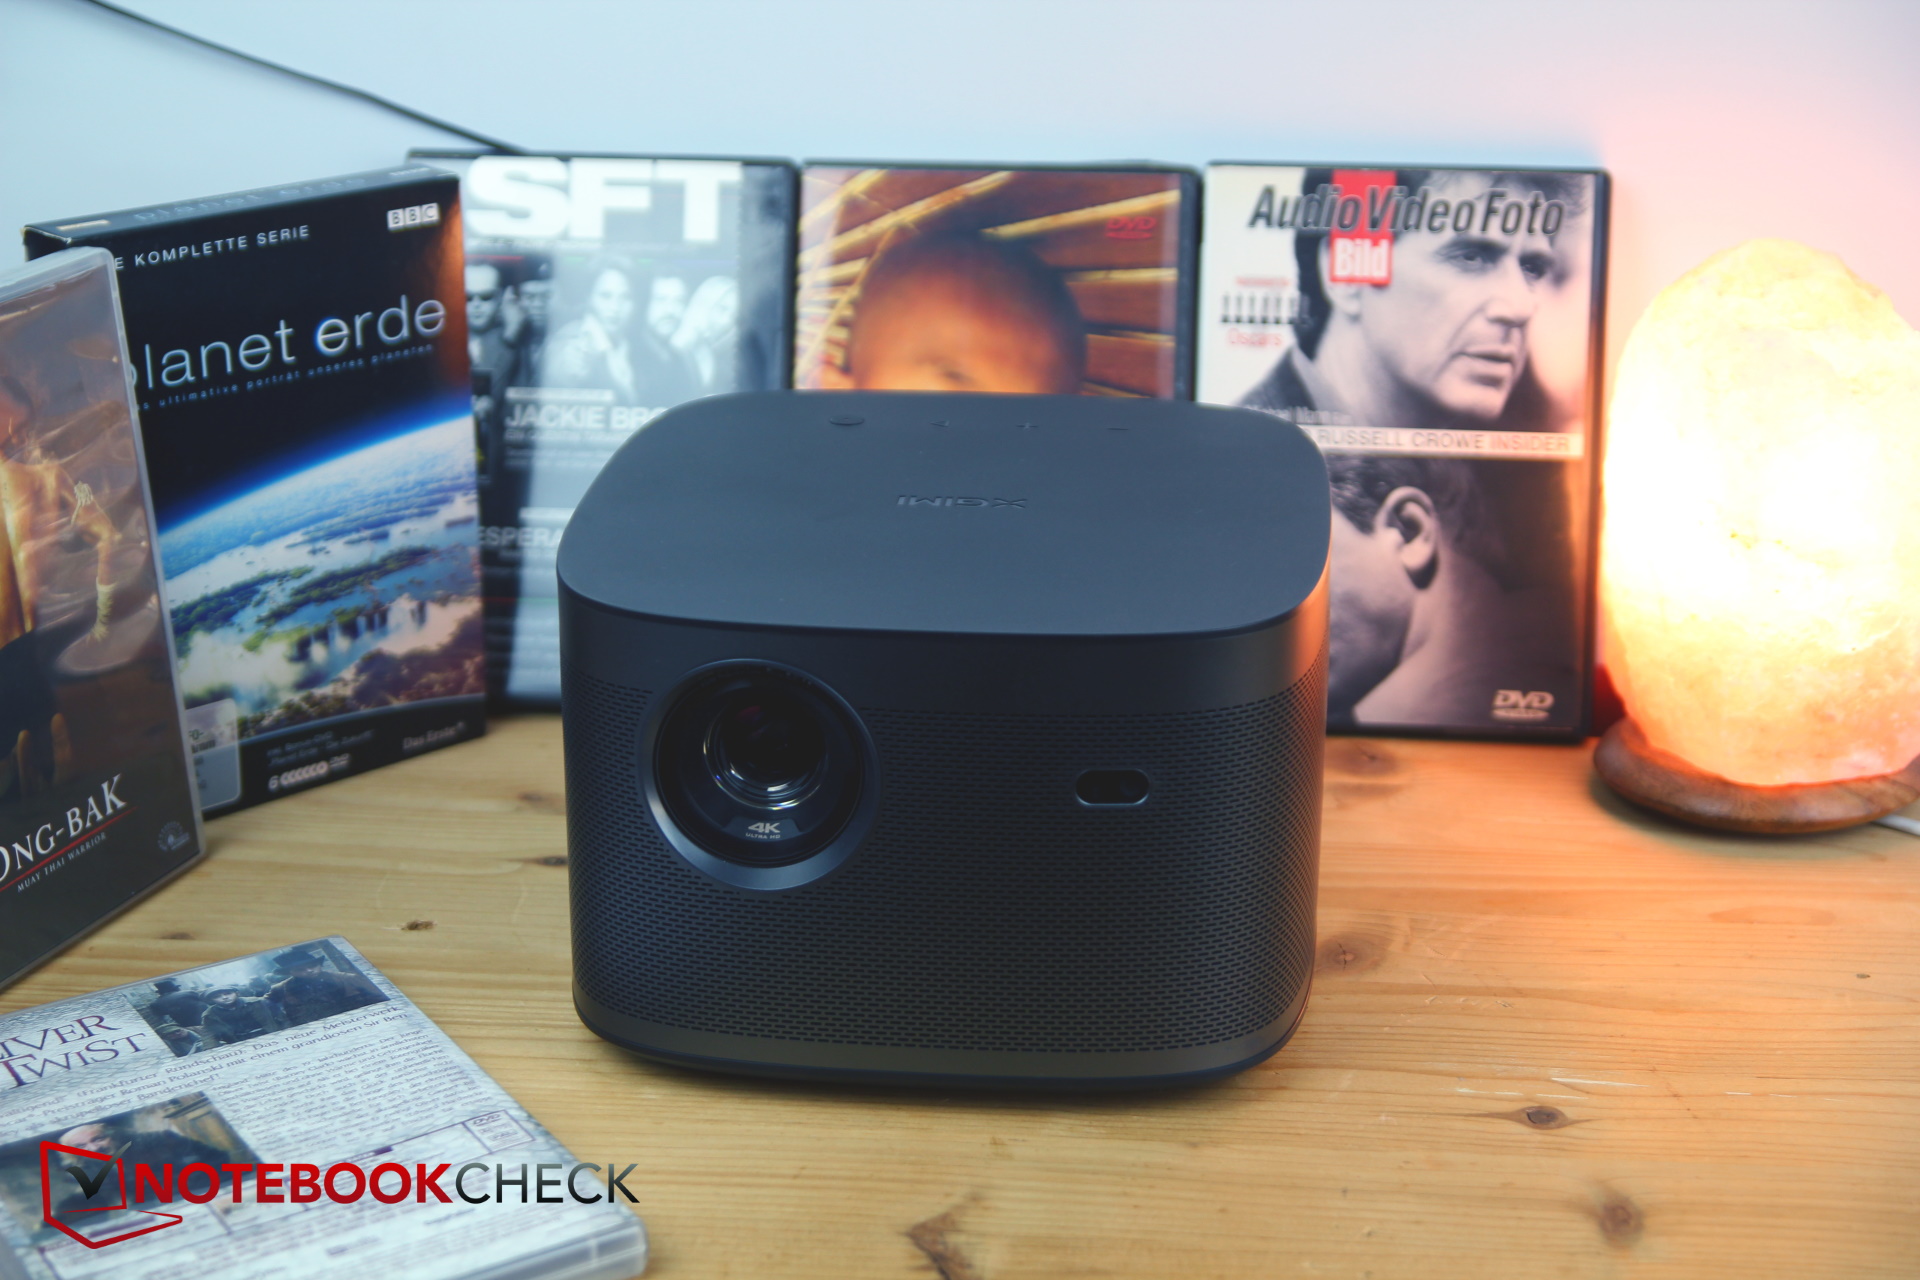 Xgimi Horizon Pro review: a compact 4K projector with built-in